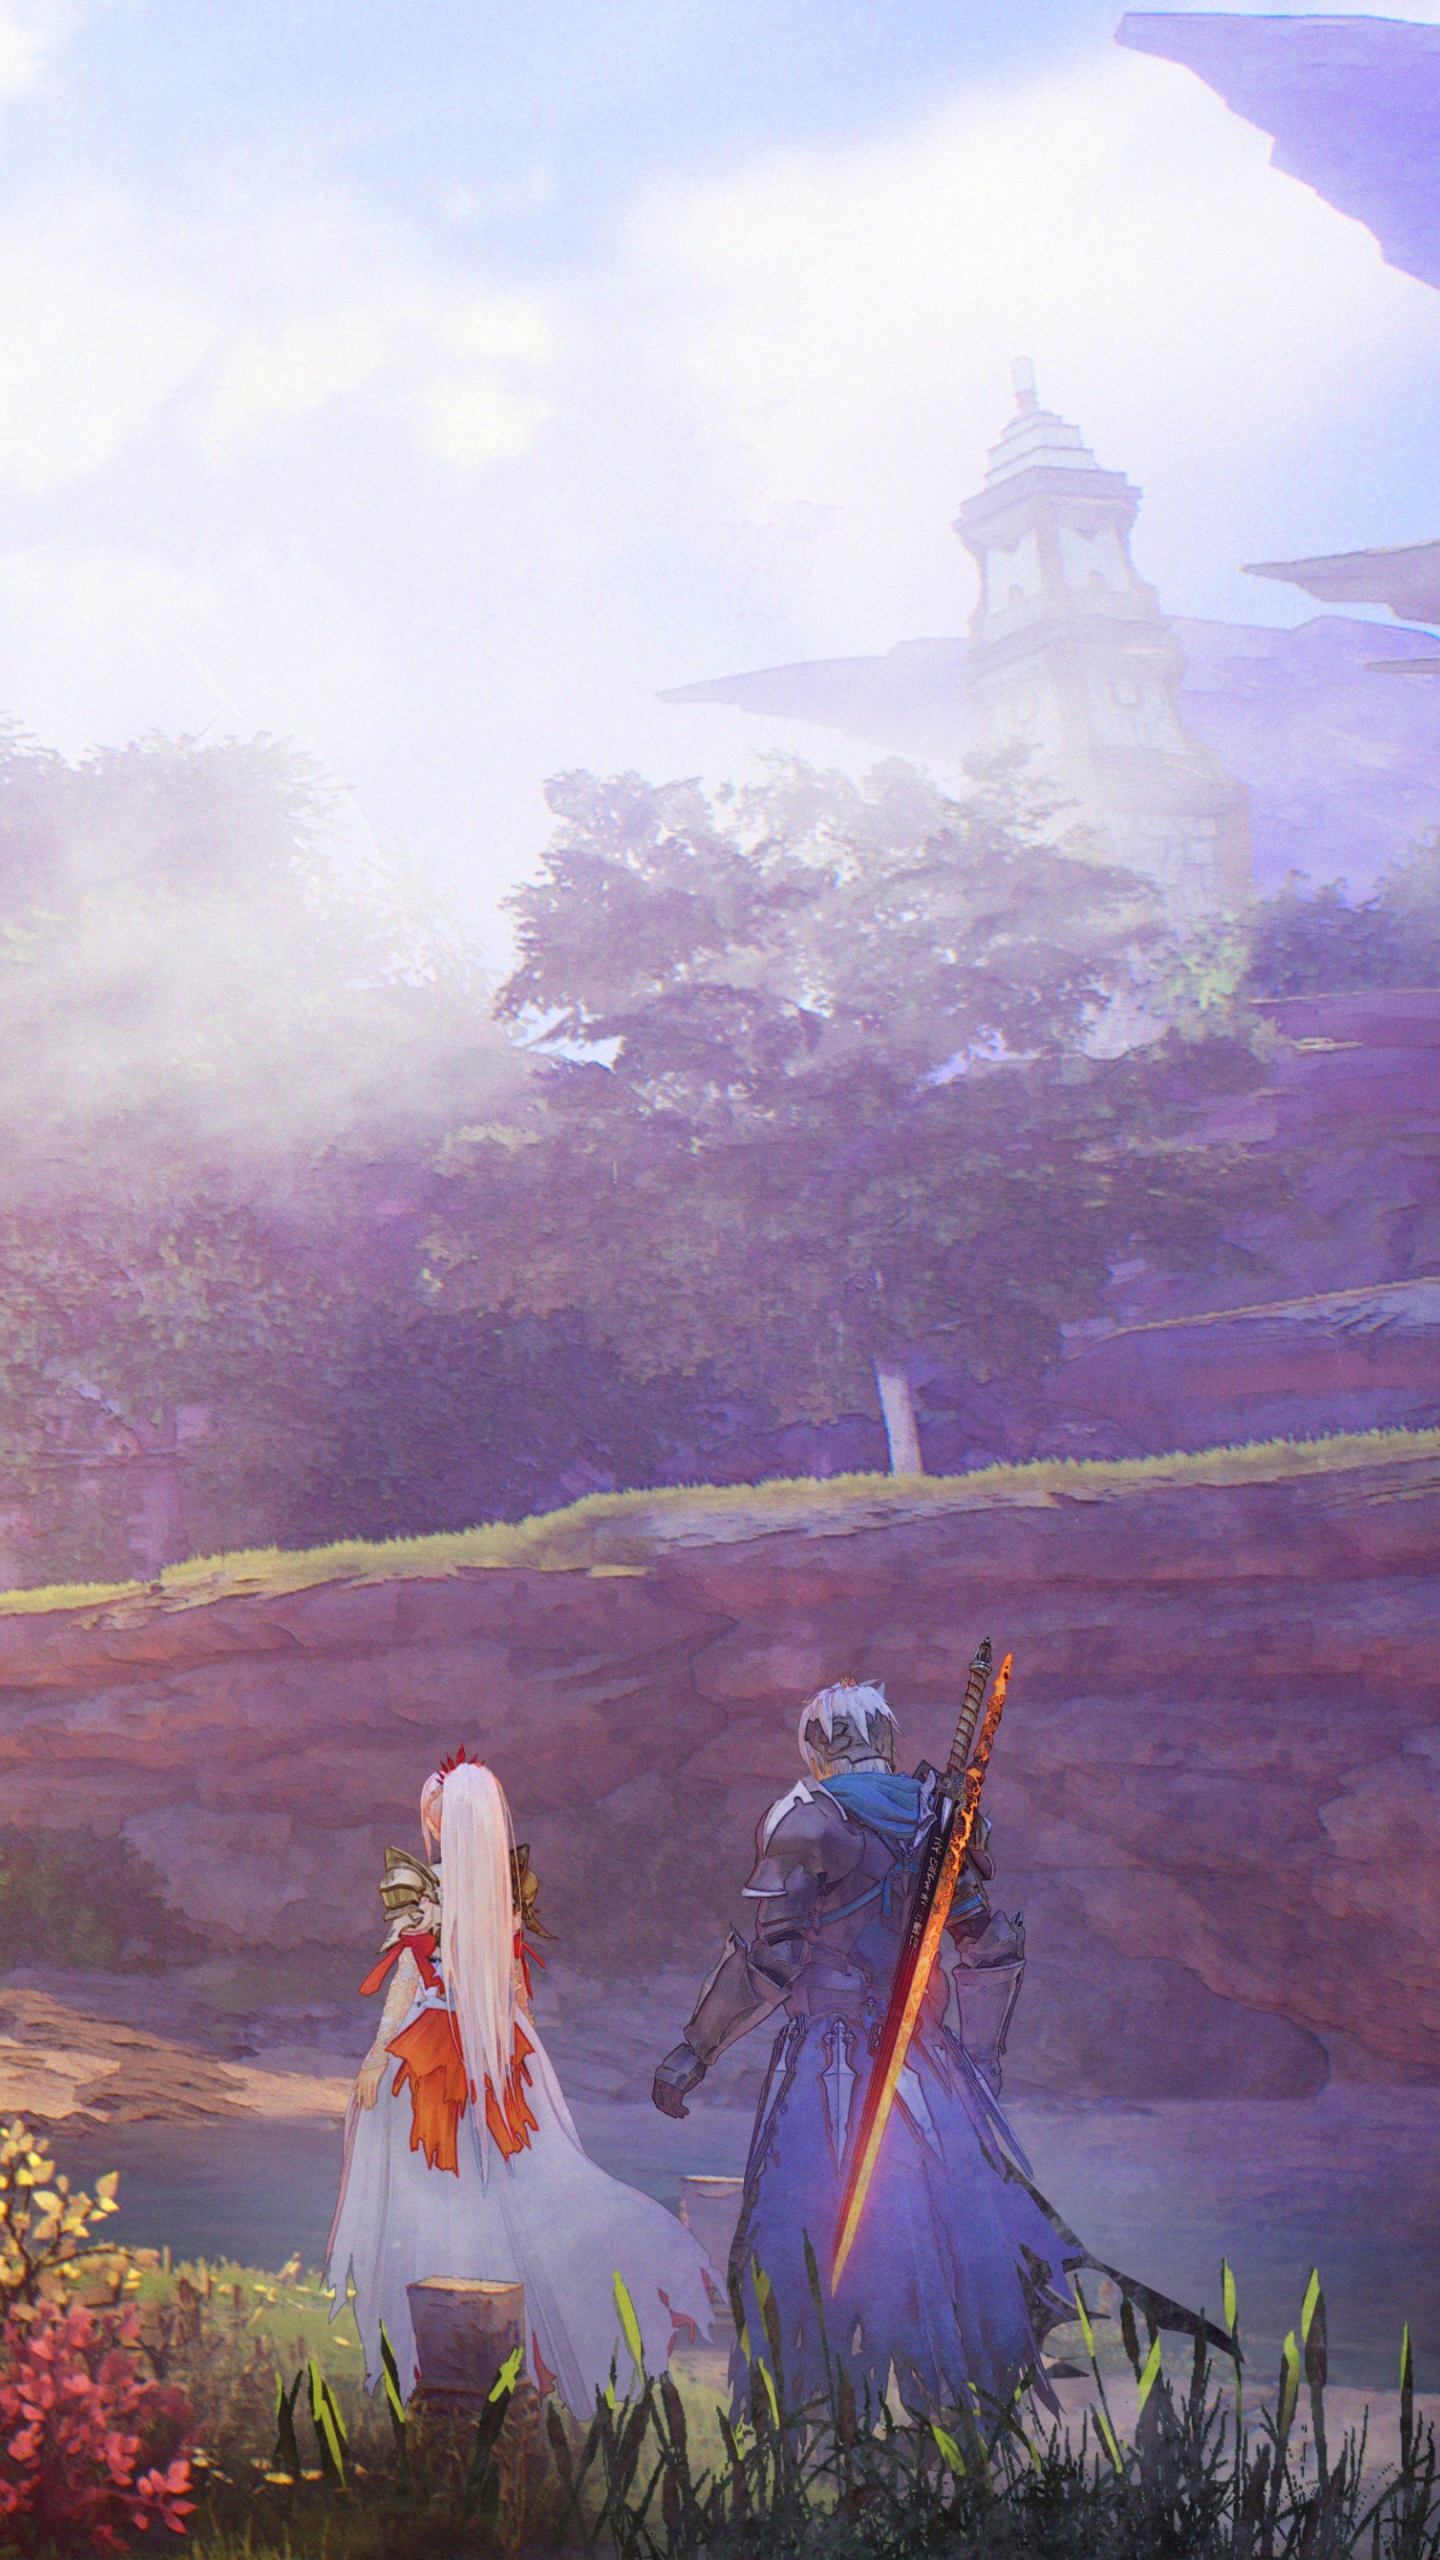 tales of arise, video game High Definition image